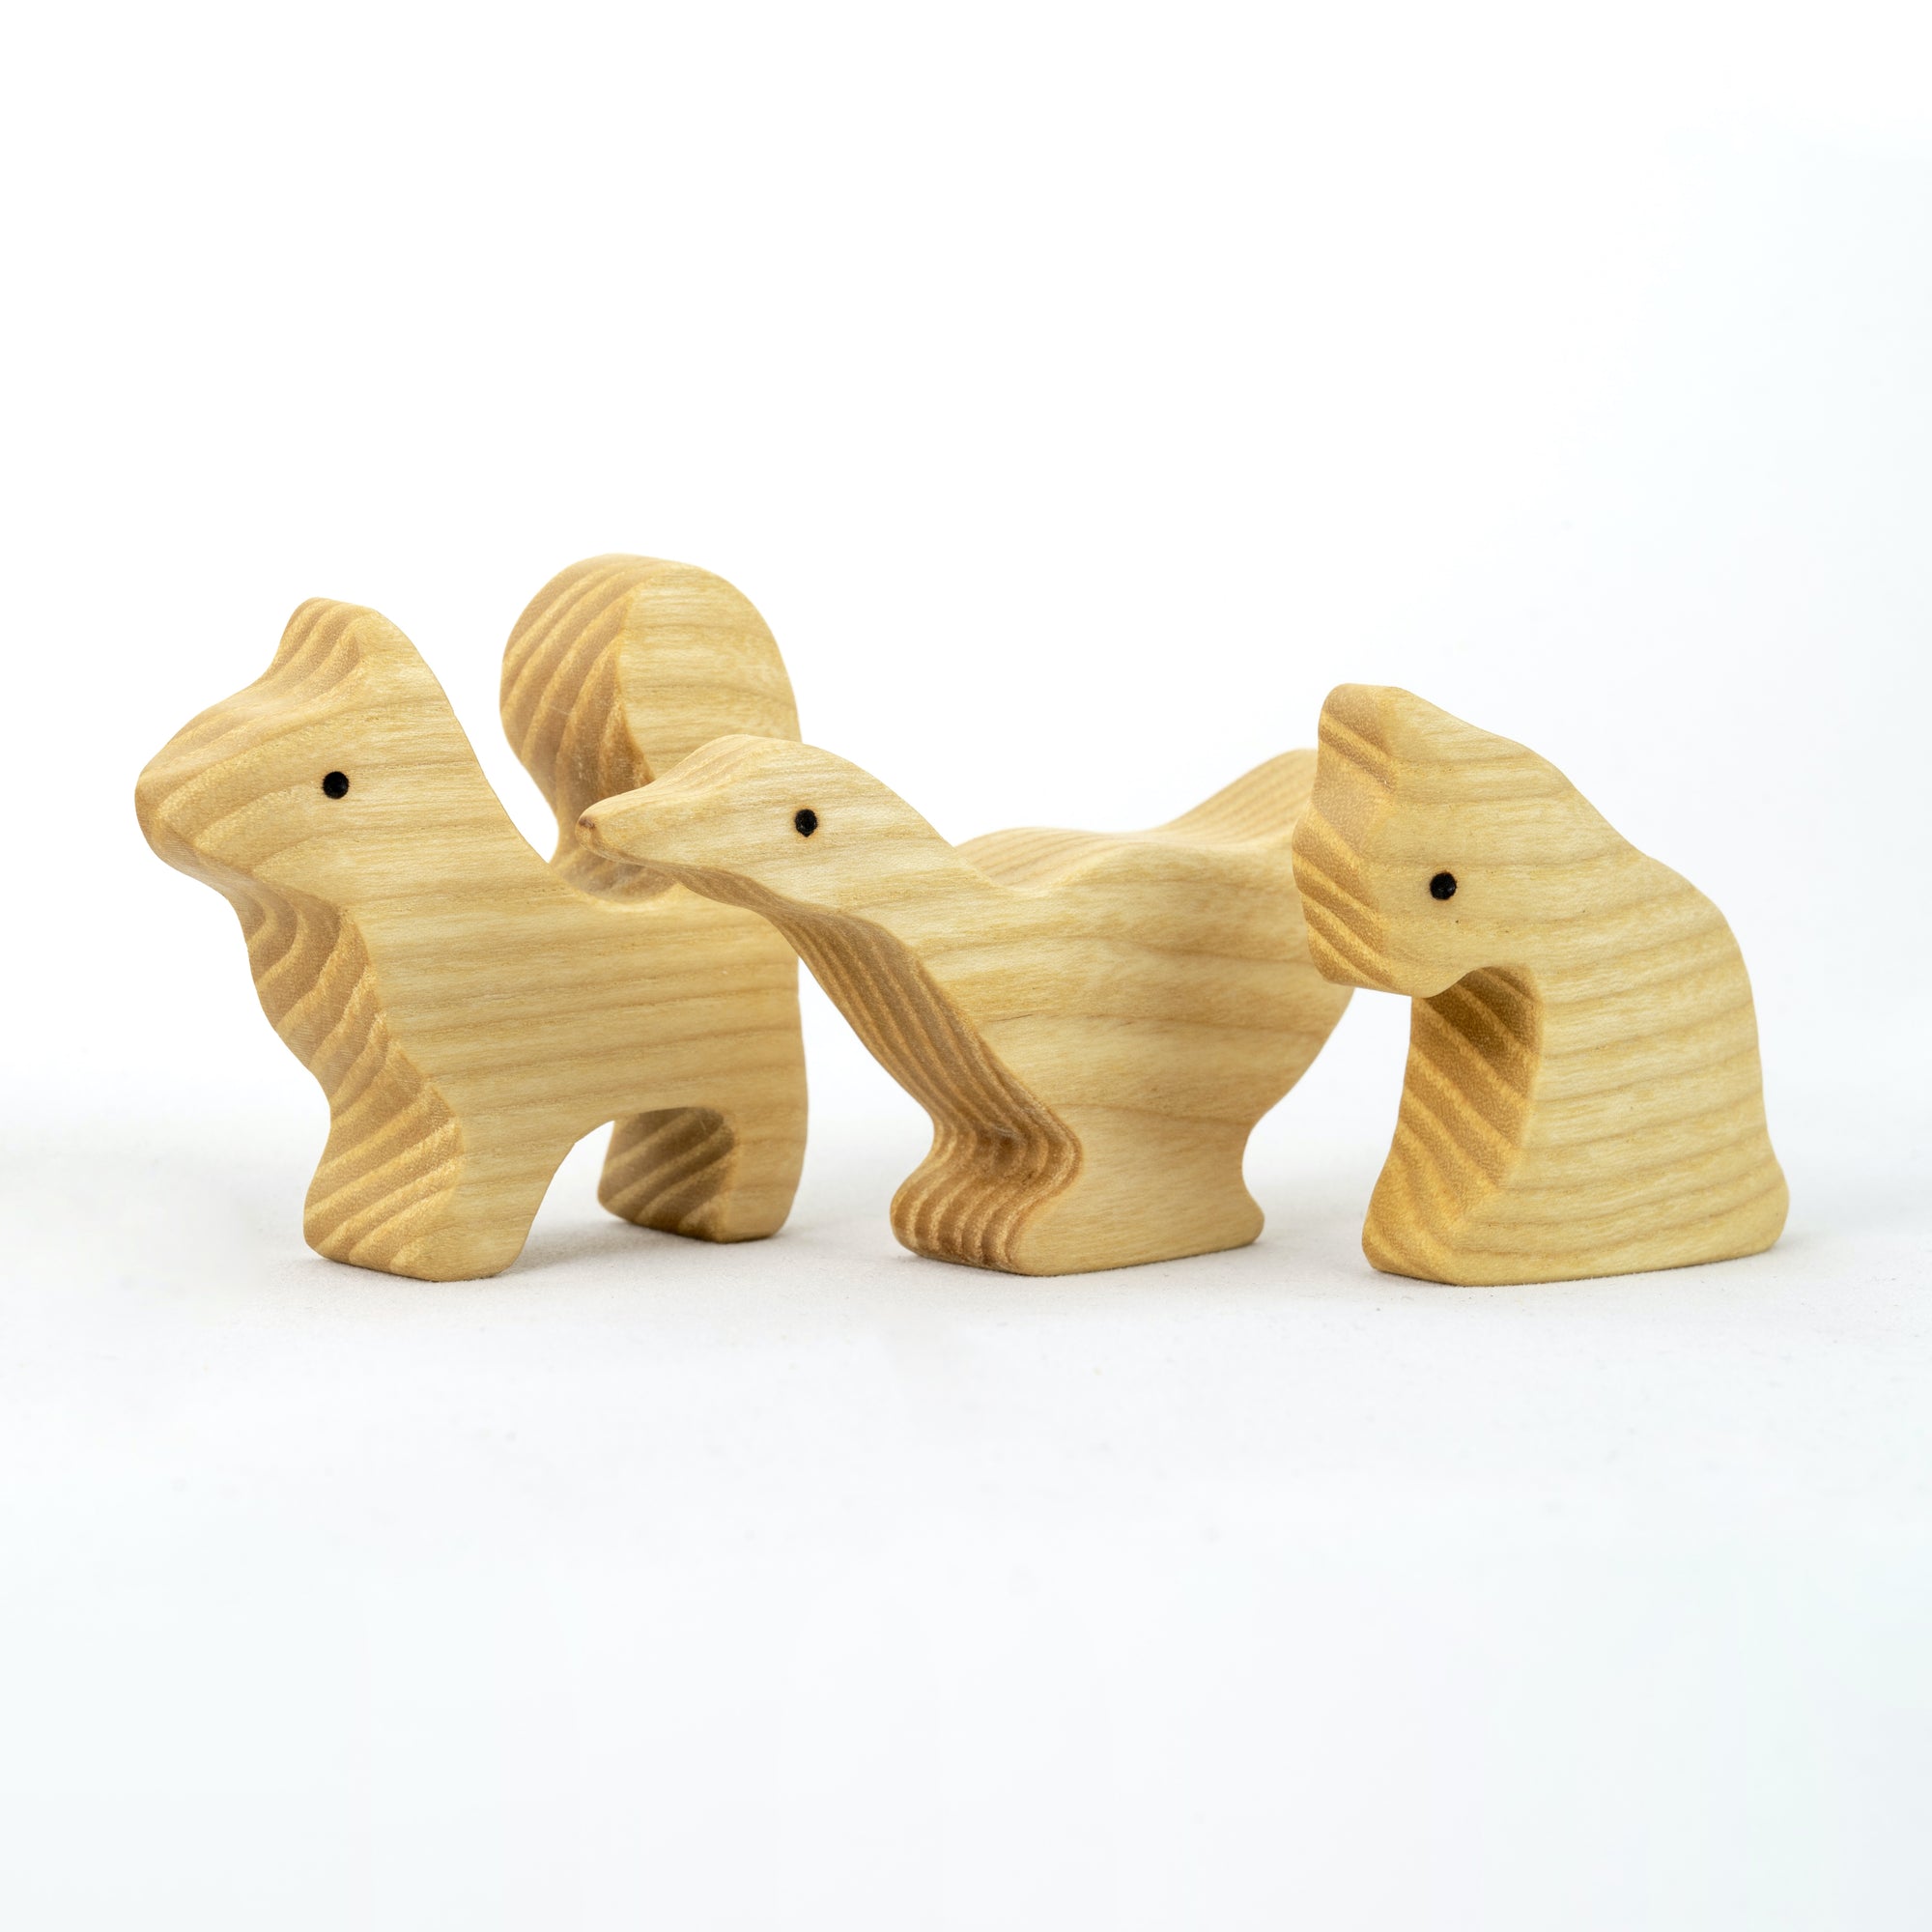 Waldorf Wooden Toys, Wooden Animals, Woodland Toys, Organic Toys, Play Set  for Kids, Waldorf Toys, Wooden Toys, Toddler Toy, Forest Animals 